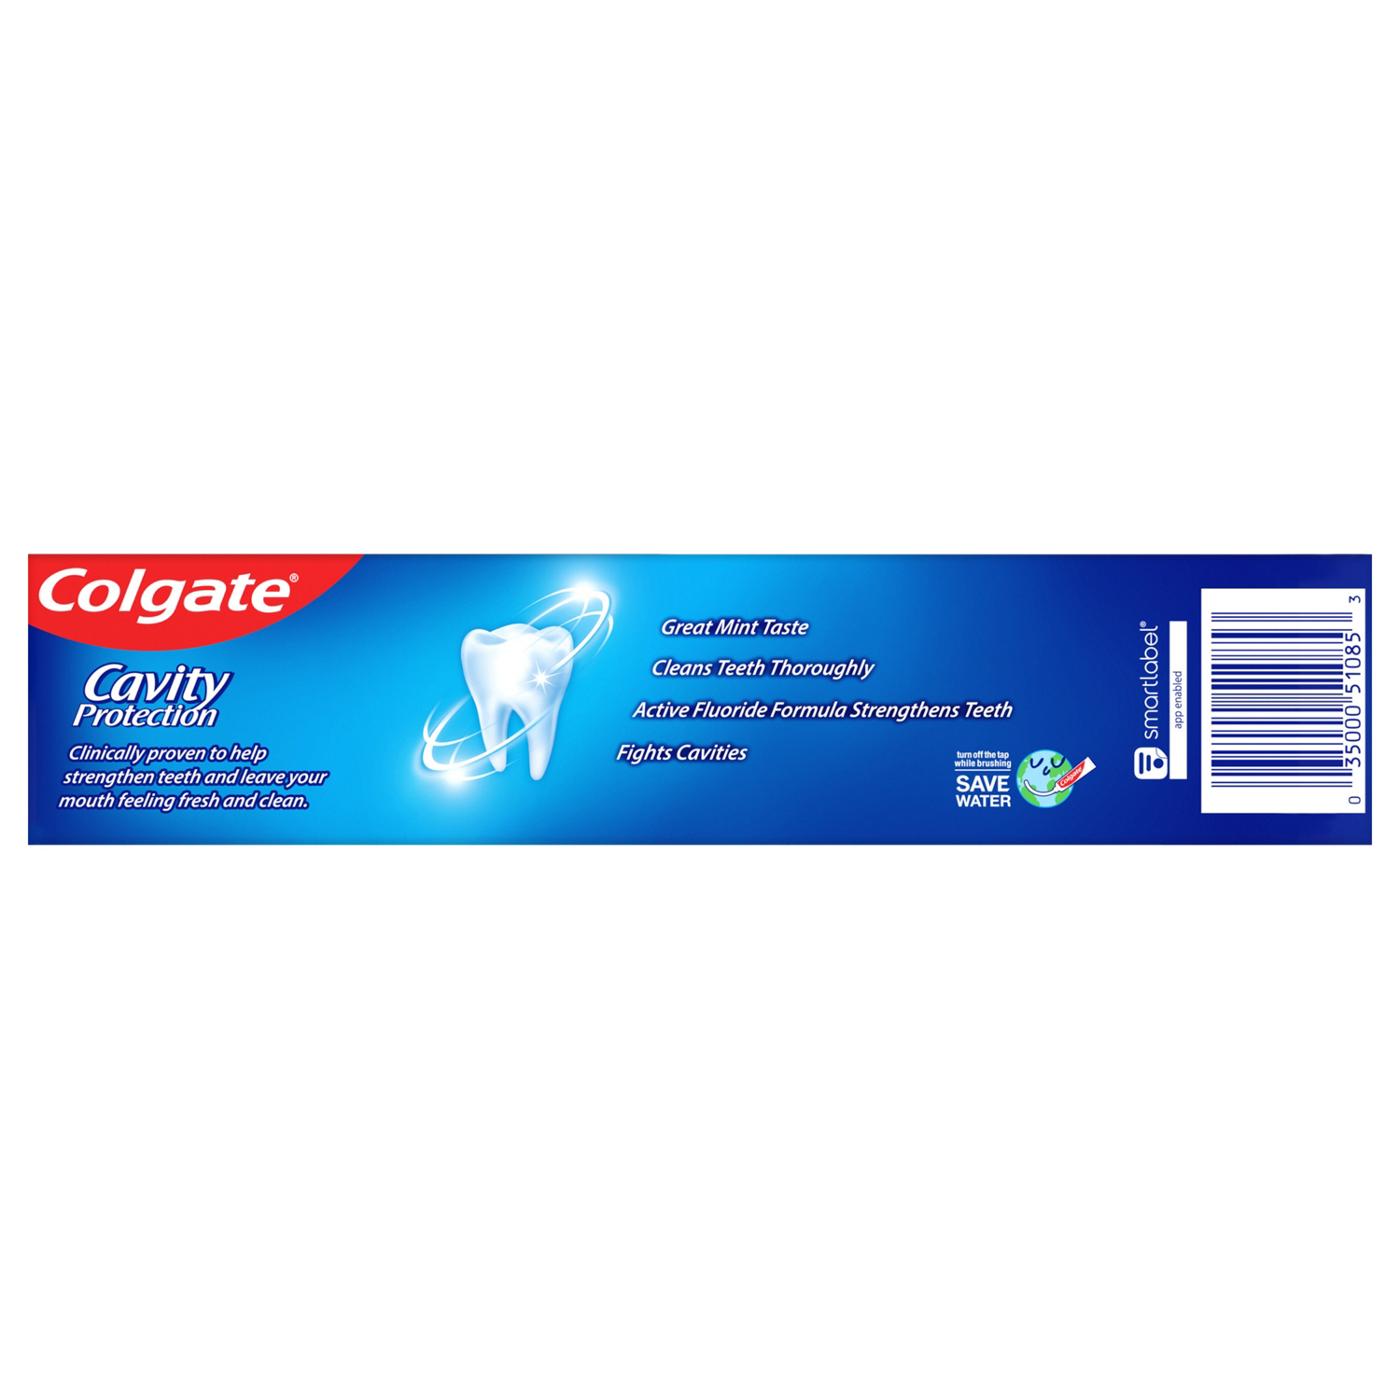 Colgate Cavity Protection Toothpaste; image 2 of 3